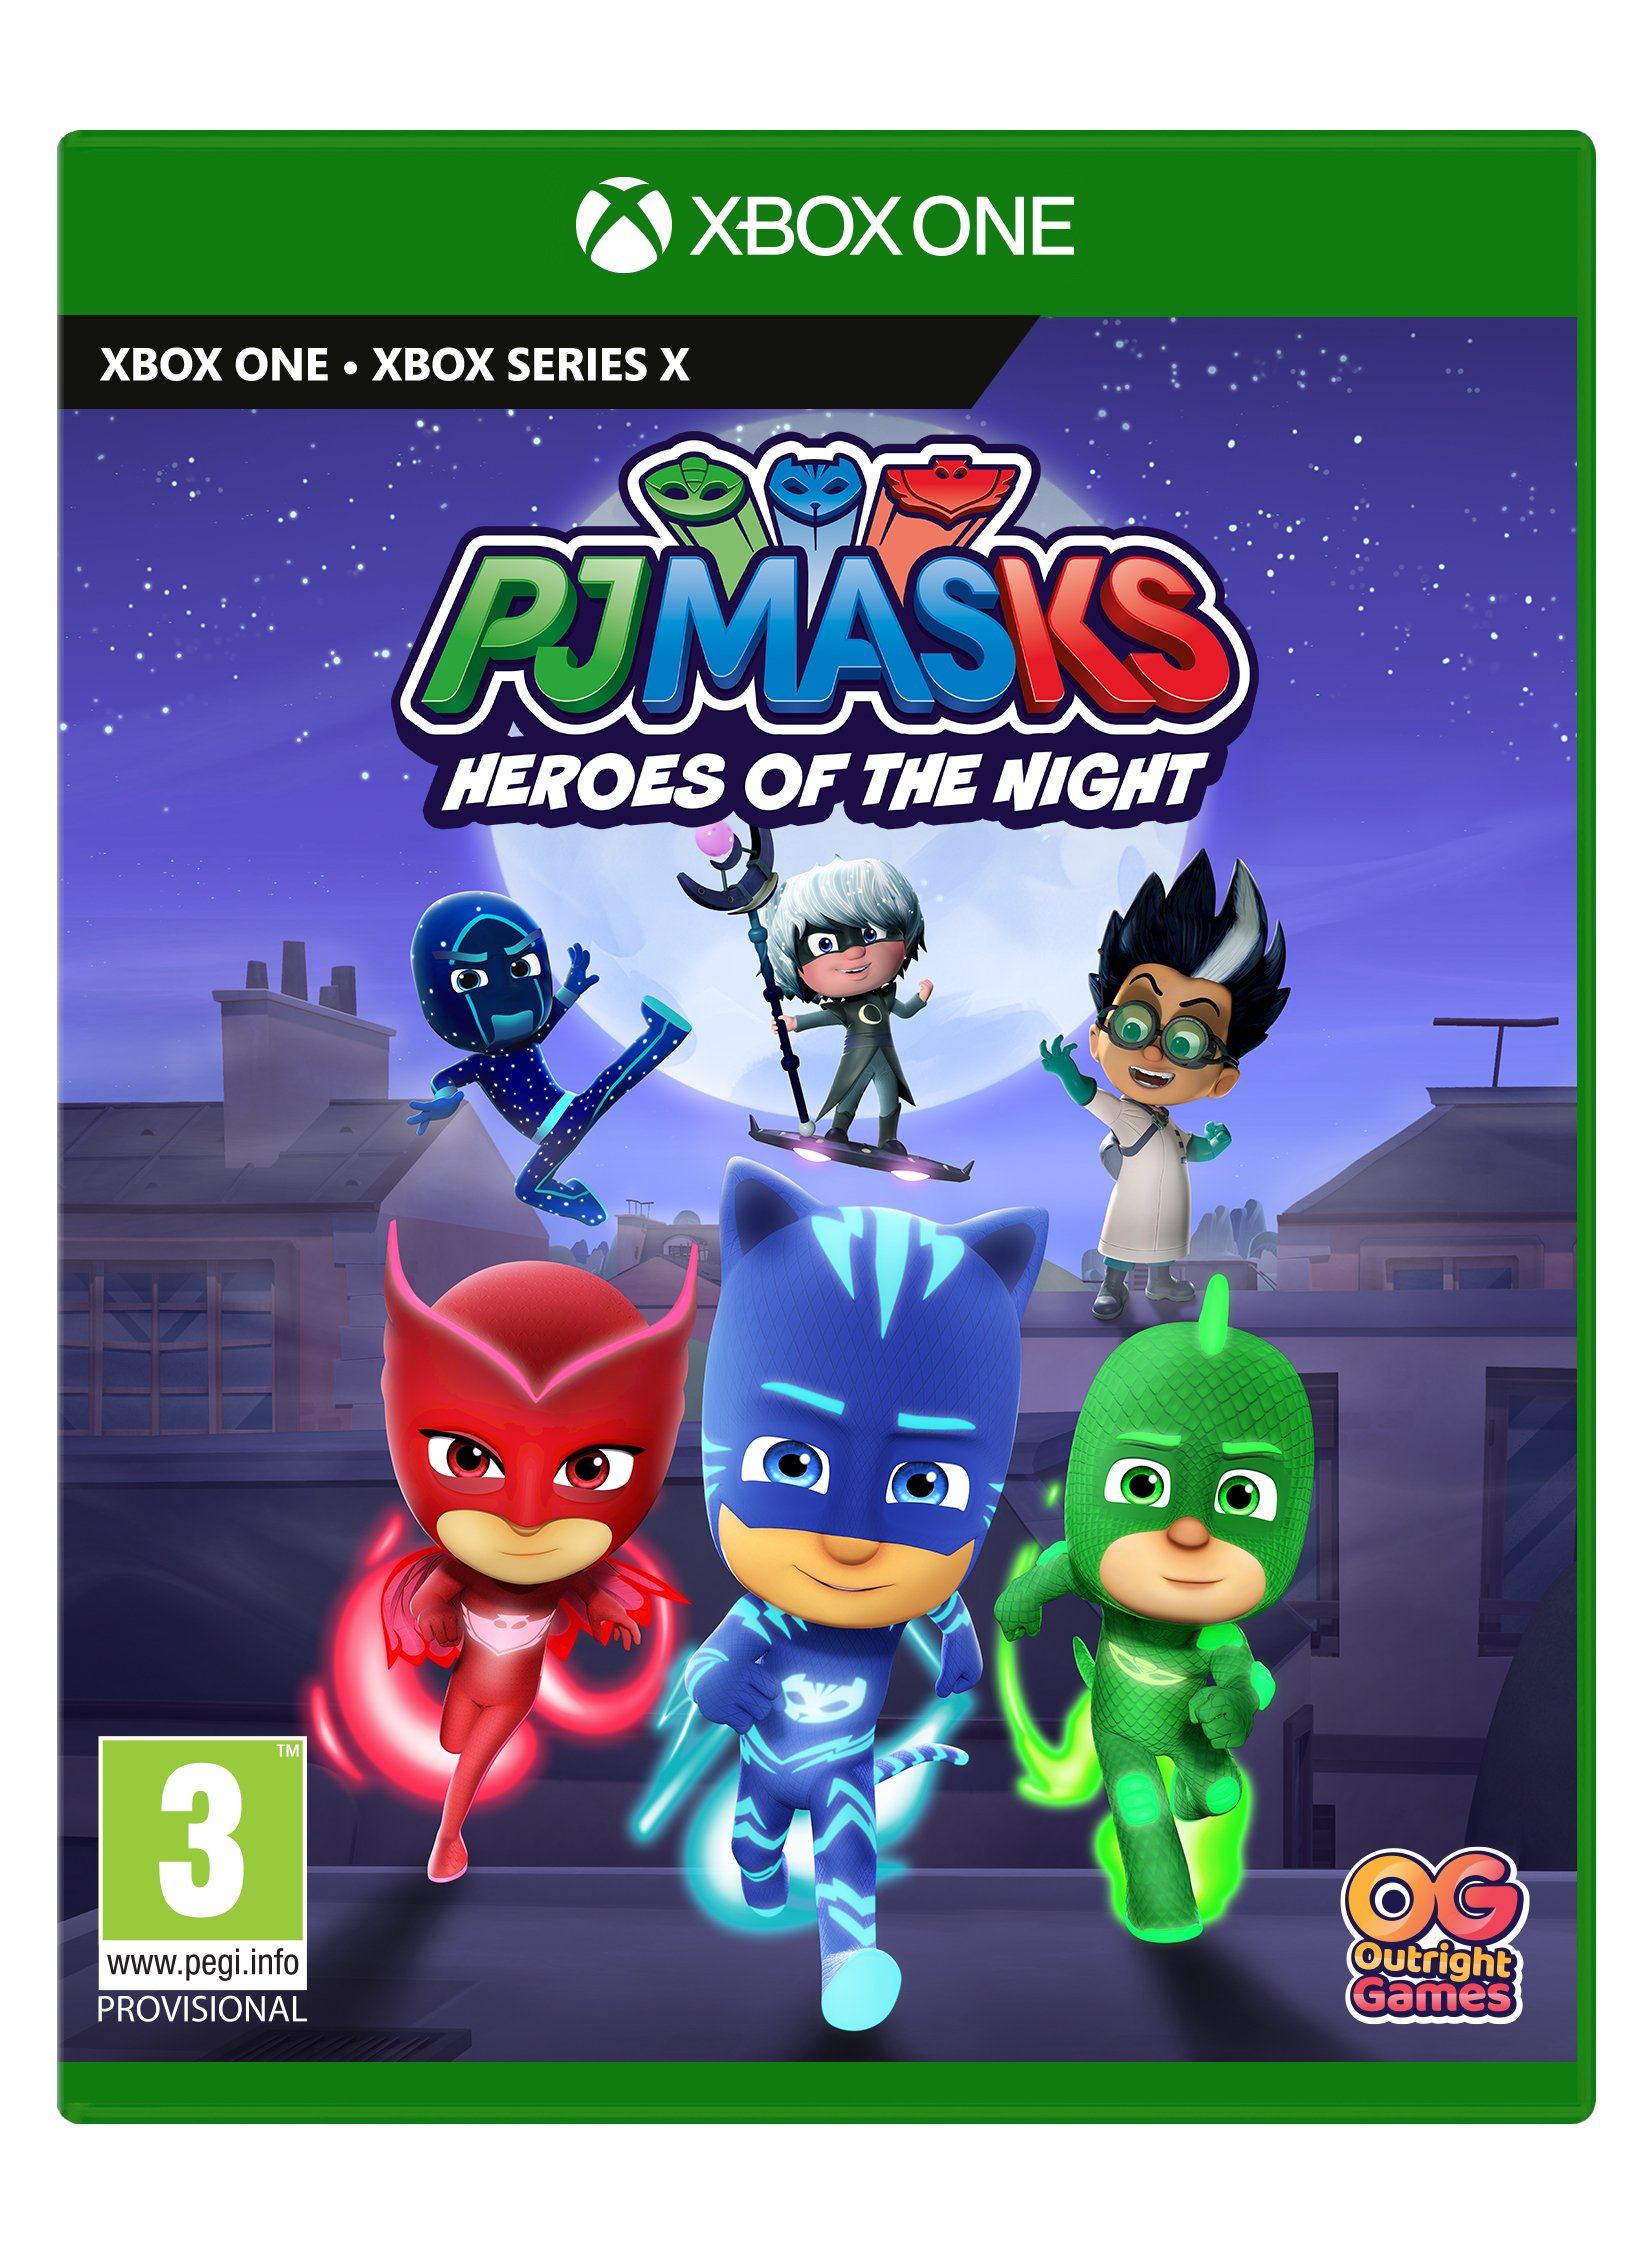 PJ Masks: Heroes of the Night (XONE/XSERIESX) von Outright Games